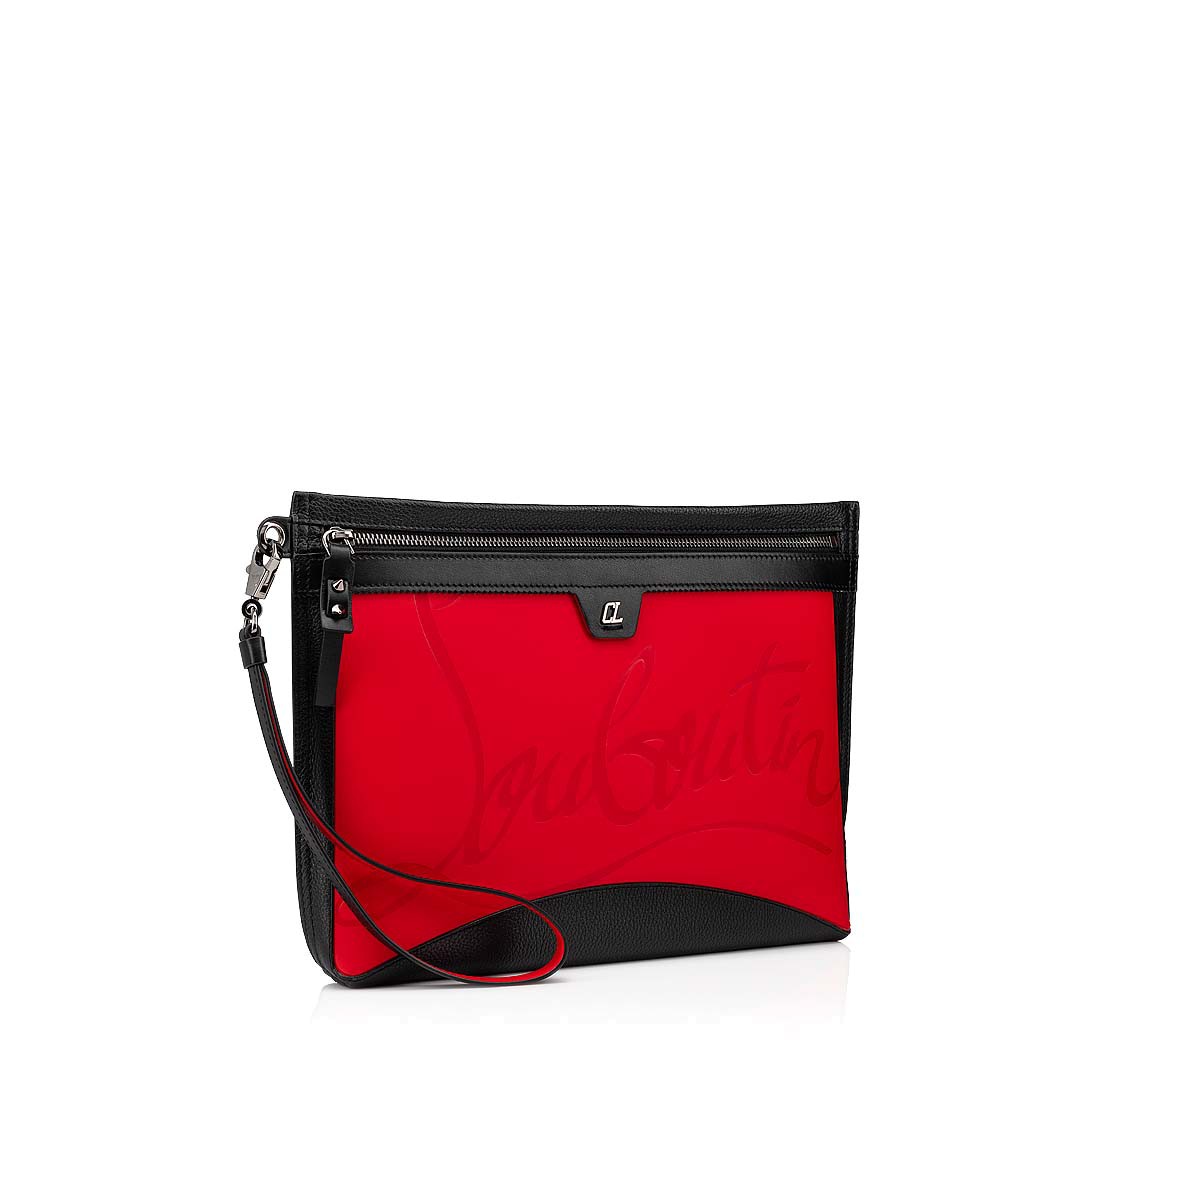 Bags - Citypouch - Christian Louboutin